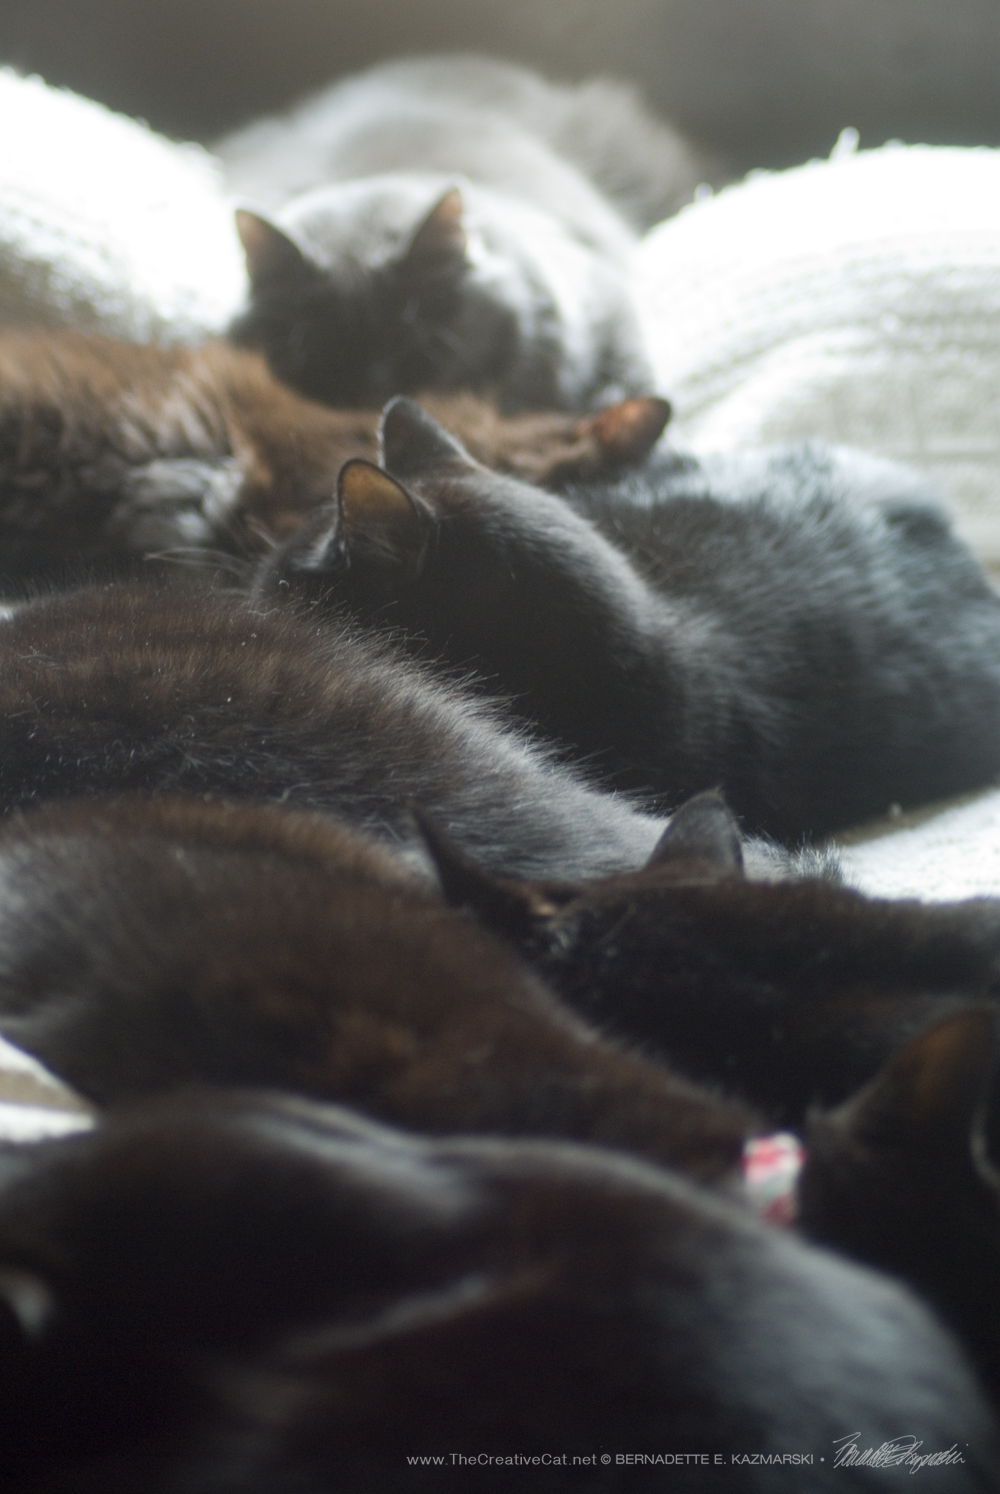 seven cats, six black cats one gray cat, daily cat photo